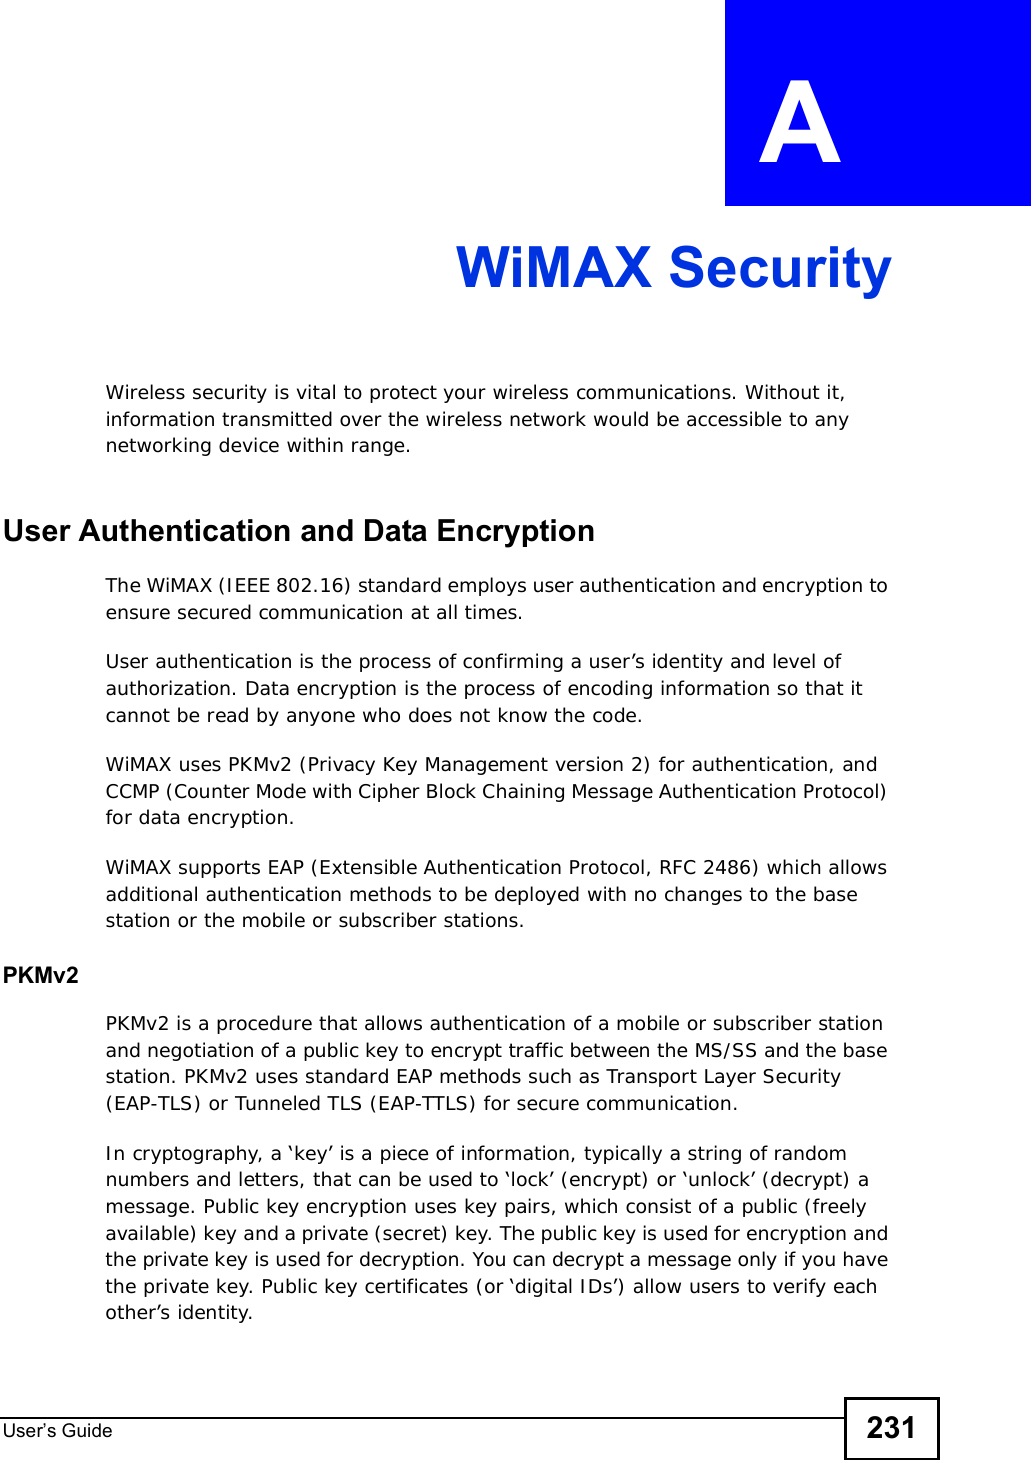 User s Guide 231APPENDIX  A WiMAX SecurityWireless security is vital to protect your wireless communications. Without it, information transmitted over the wireless network would be accessible to any networking device within range.User Authentication and Data EncryptionThe WiMAX (IEEE 802.16) standard employs user authentication and encryption to ensure secured communication at all times.User authentication is the process of confirming a user’s identity and level of authorization. Data encryption is the process of encoding information so that it cannot be read by anyone who does not know the code. WiMAX uses PKMv2 (Privacy Key Management version 2) for authentication, and CCMP (Counter Mode with Cipher Block Chaining Message Authentication Protocol) for data encryption. WiMAX supports EAP (Extensible Authentication Protocol, RFC 2486) which allows additional authentication methods to be deployed with no changes to the base station or the mobile or subscriber stations.PKMv2PKMv2 is a procedure that allows authentication of a mobile or subscriber station and negotiation of a public key to encrypt traffic between the MS/SS and the base station. PKMv2 uses standard EAP methods such as Transport Layer Security (EAP-TLS) or Tunneled TLS (EAP-TTLS) for secure communication. In cryptography, a ‘key’ is a piece of information, typically a string of random numbers and letters, that can be used to ‘lock’ (encrypt) or ‘unlock’ (decrypt) a message. Public key encryption uses key pairs, which consist of a public (freely available) key and a private (secret) key. The public key is used for encryption and the private key is used for decryption. You can decrypt a message only if you have the private key. Public key certificates (or ‘digital IDs’) allow users to verify each other’s identity. 